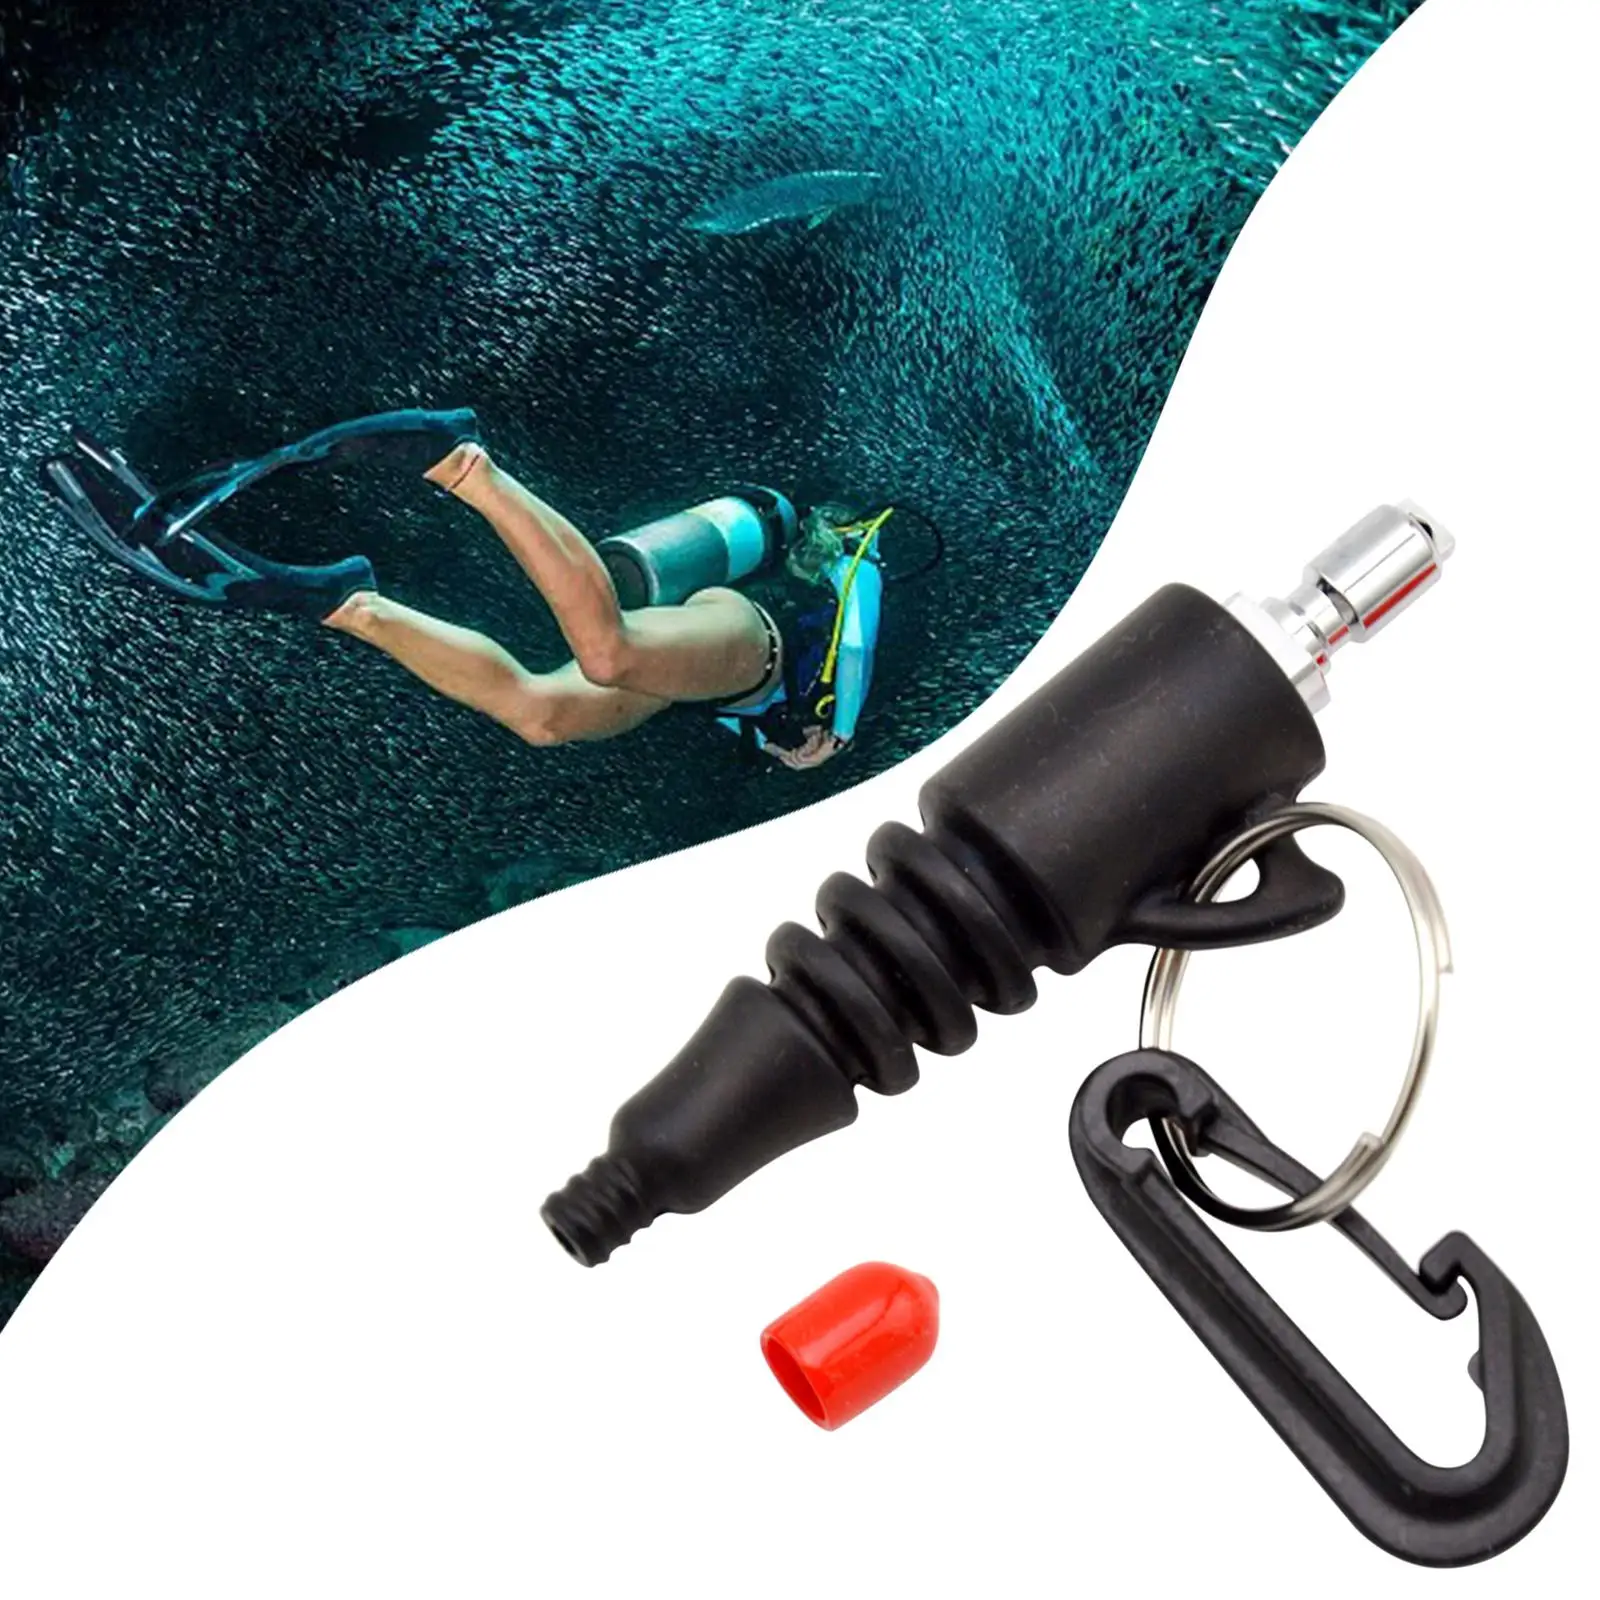 Professional Scuba Diving Air Nozzle for BCD Inflator Hose Snorkeling Boating